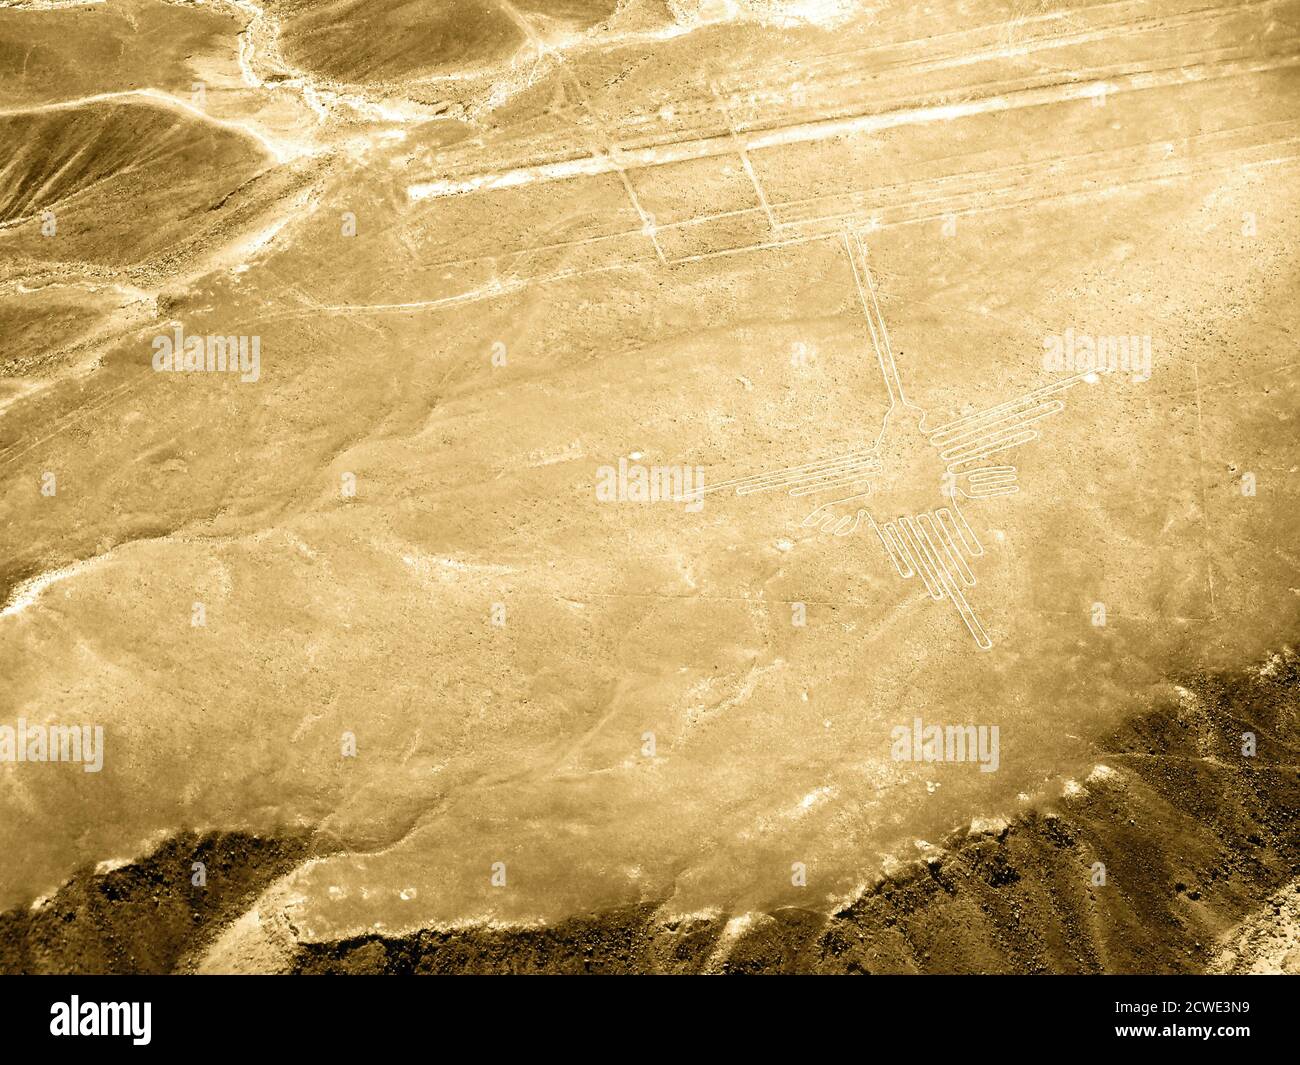 Aerial view of the famous Nazca geoglyphs, Nazca lines in Peru. Hummingbird figure. Stock Photo